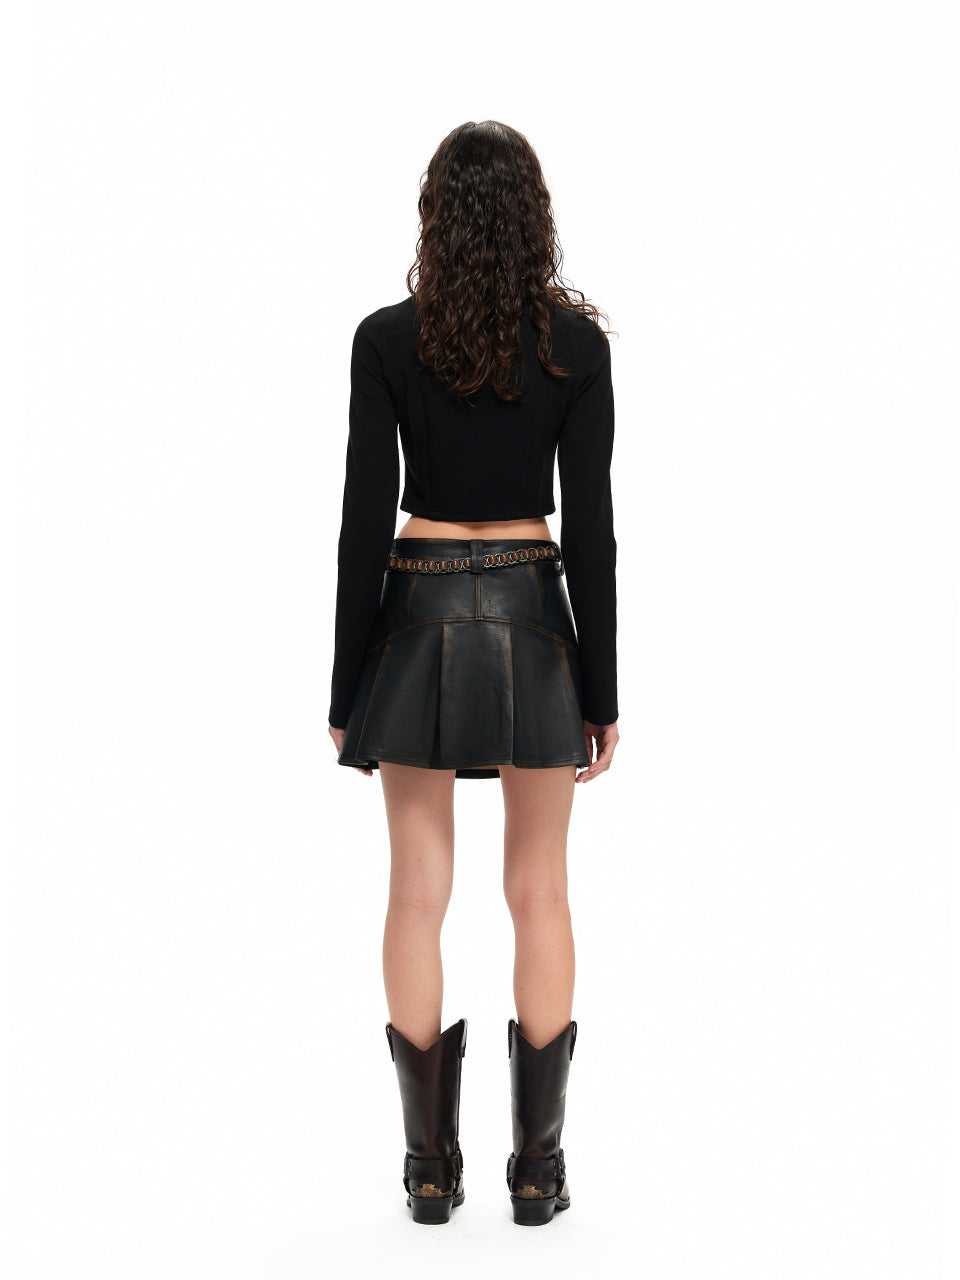 NUHT “Leather Mini Skirt” Brown Distressed Faux Leather Skirt